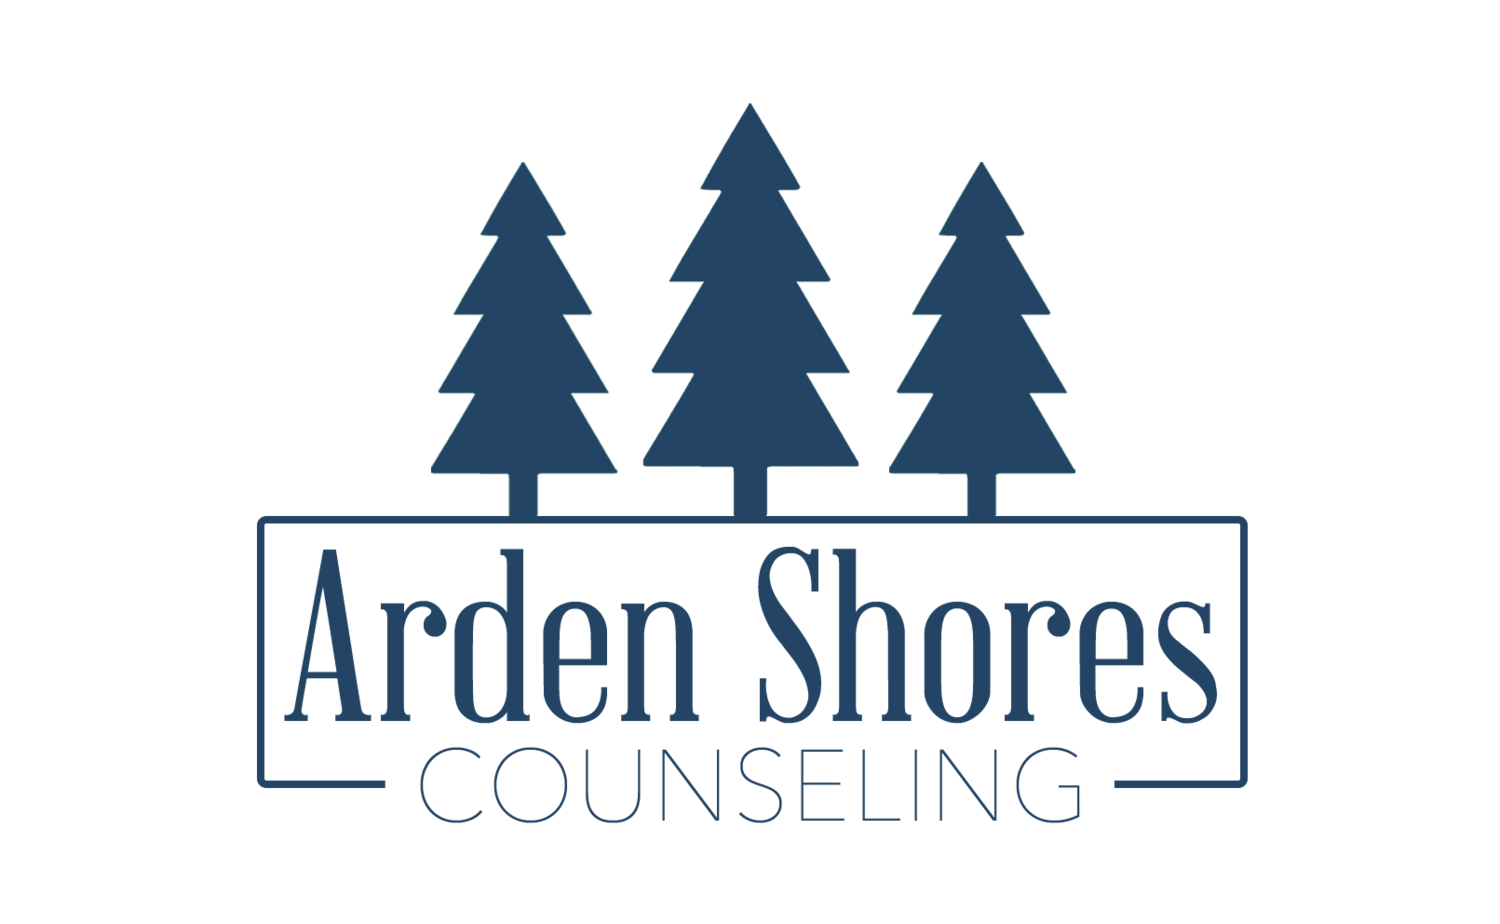 Arden Shores Counseling